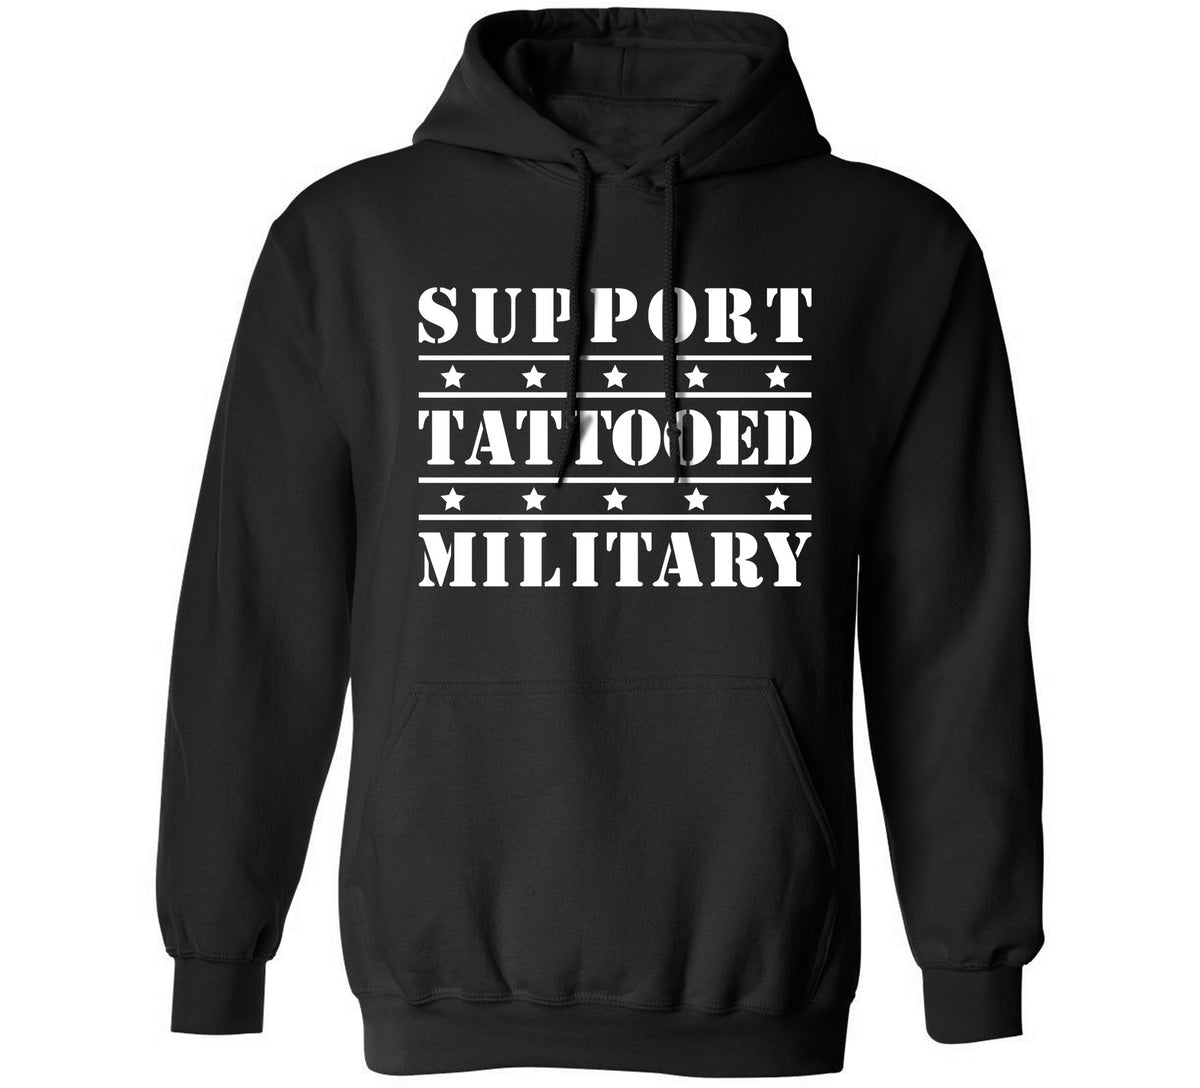 Support Tattooed Military Hoodie